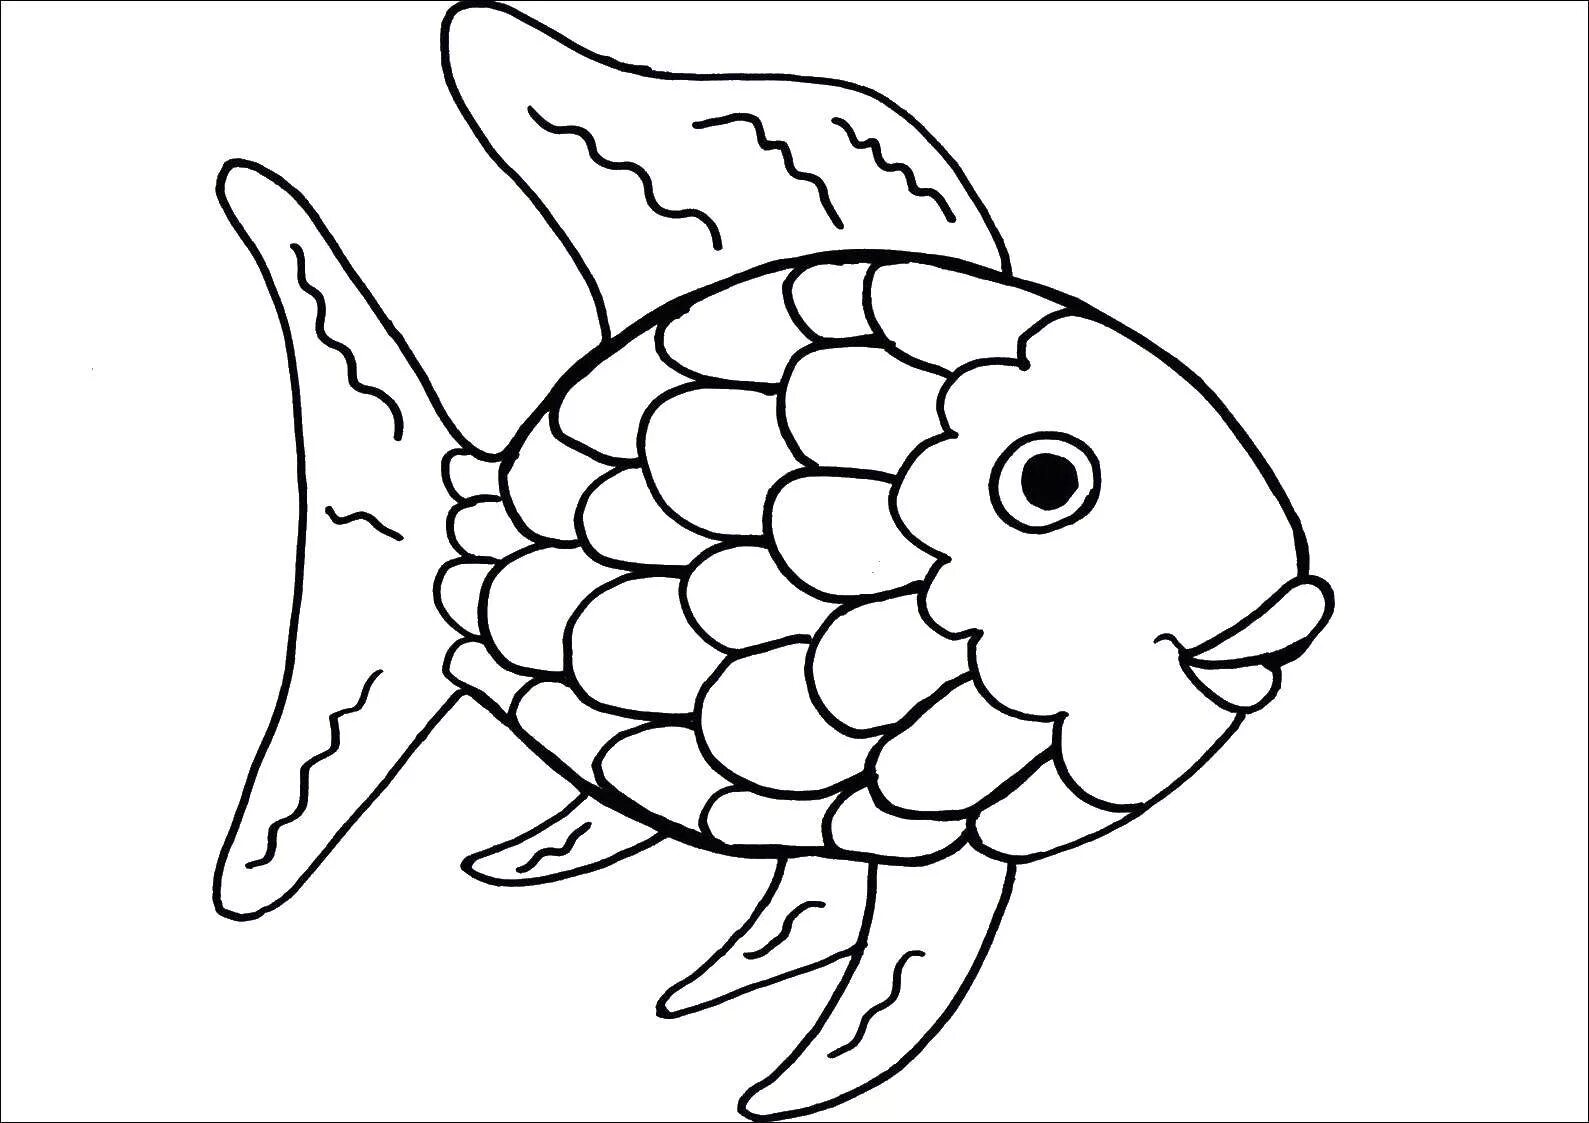 Peaceful fish coloring page